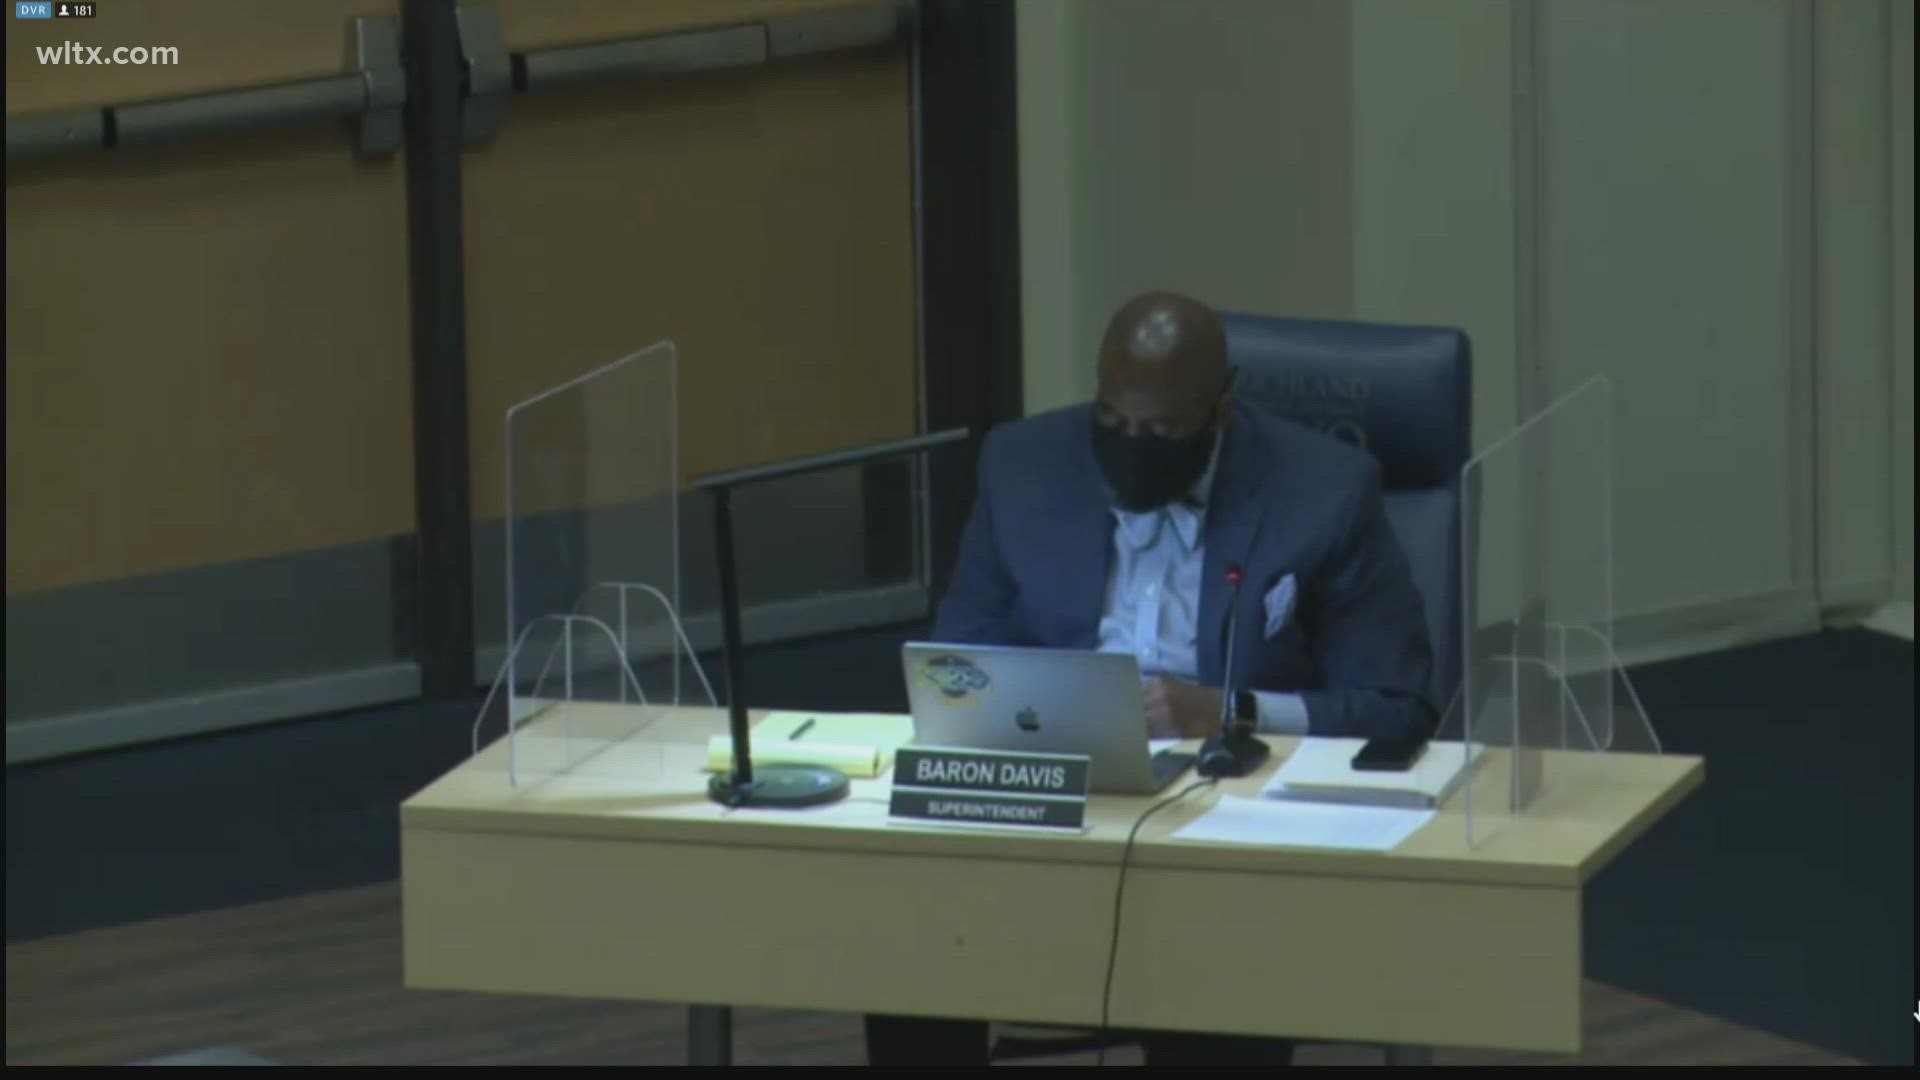 District Superintendent Baron Davis said the district plans to keep the mask requirement in place through the winter months when a spike is possible.